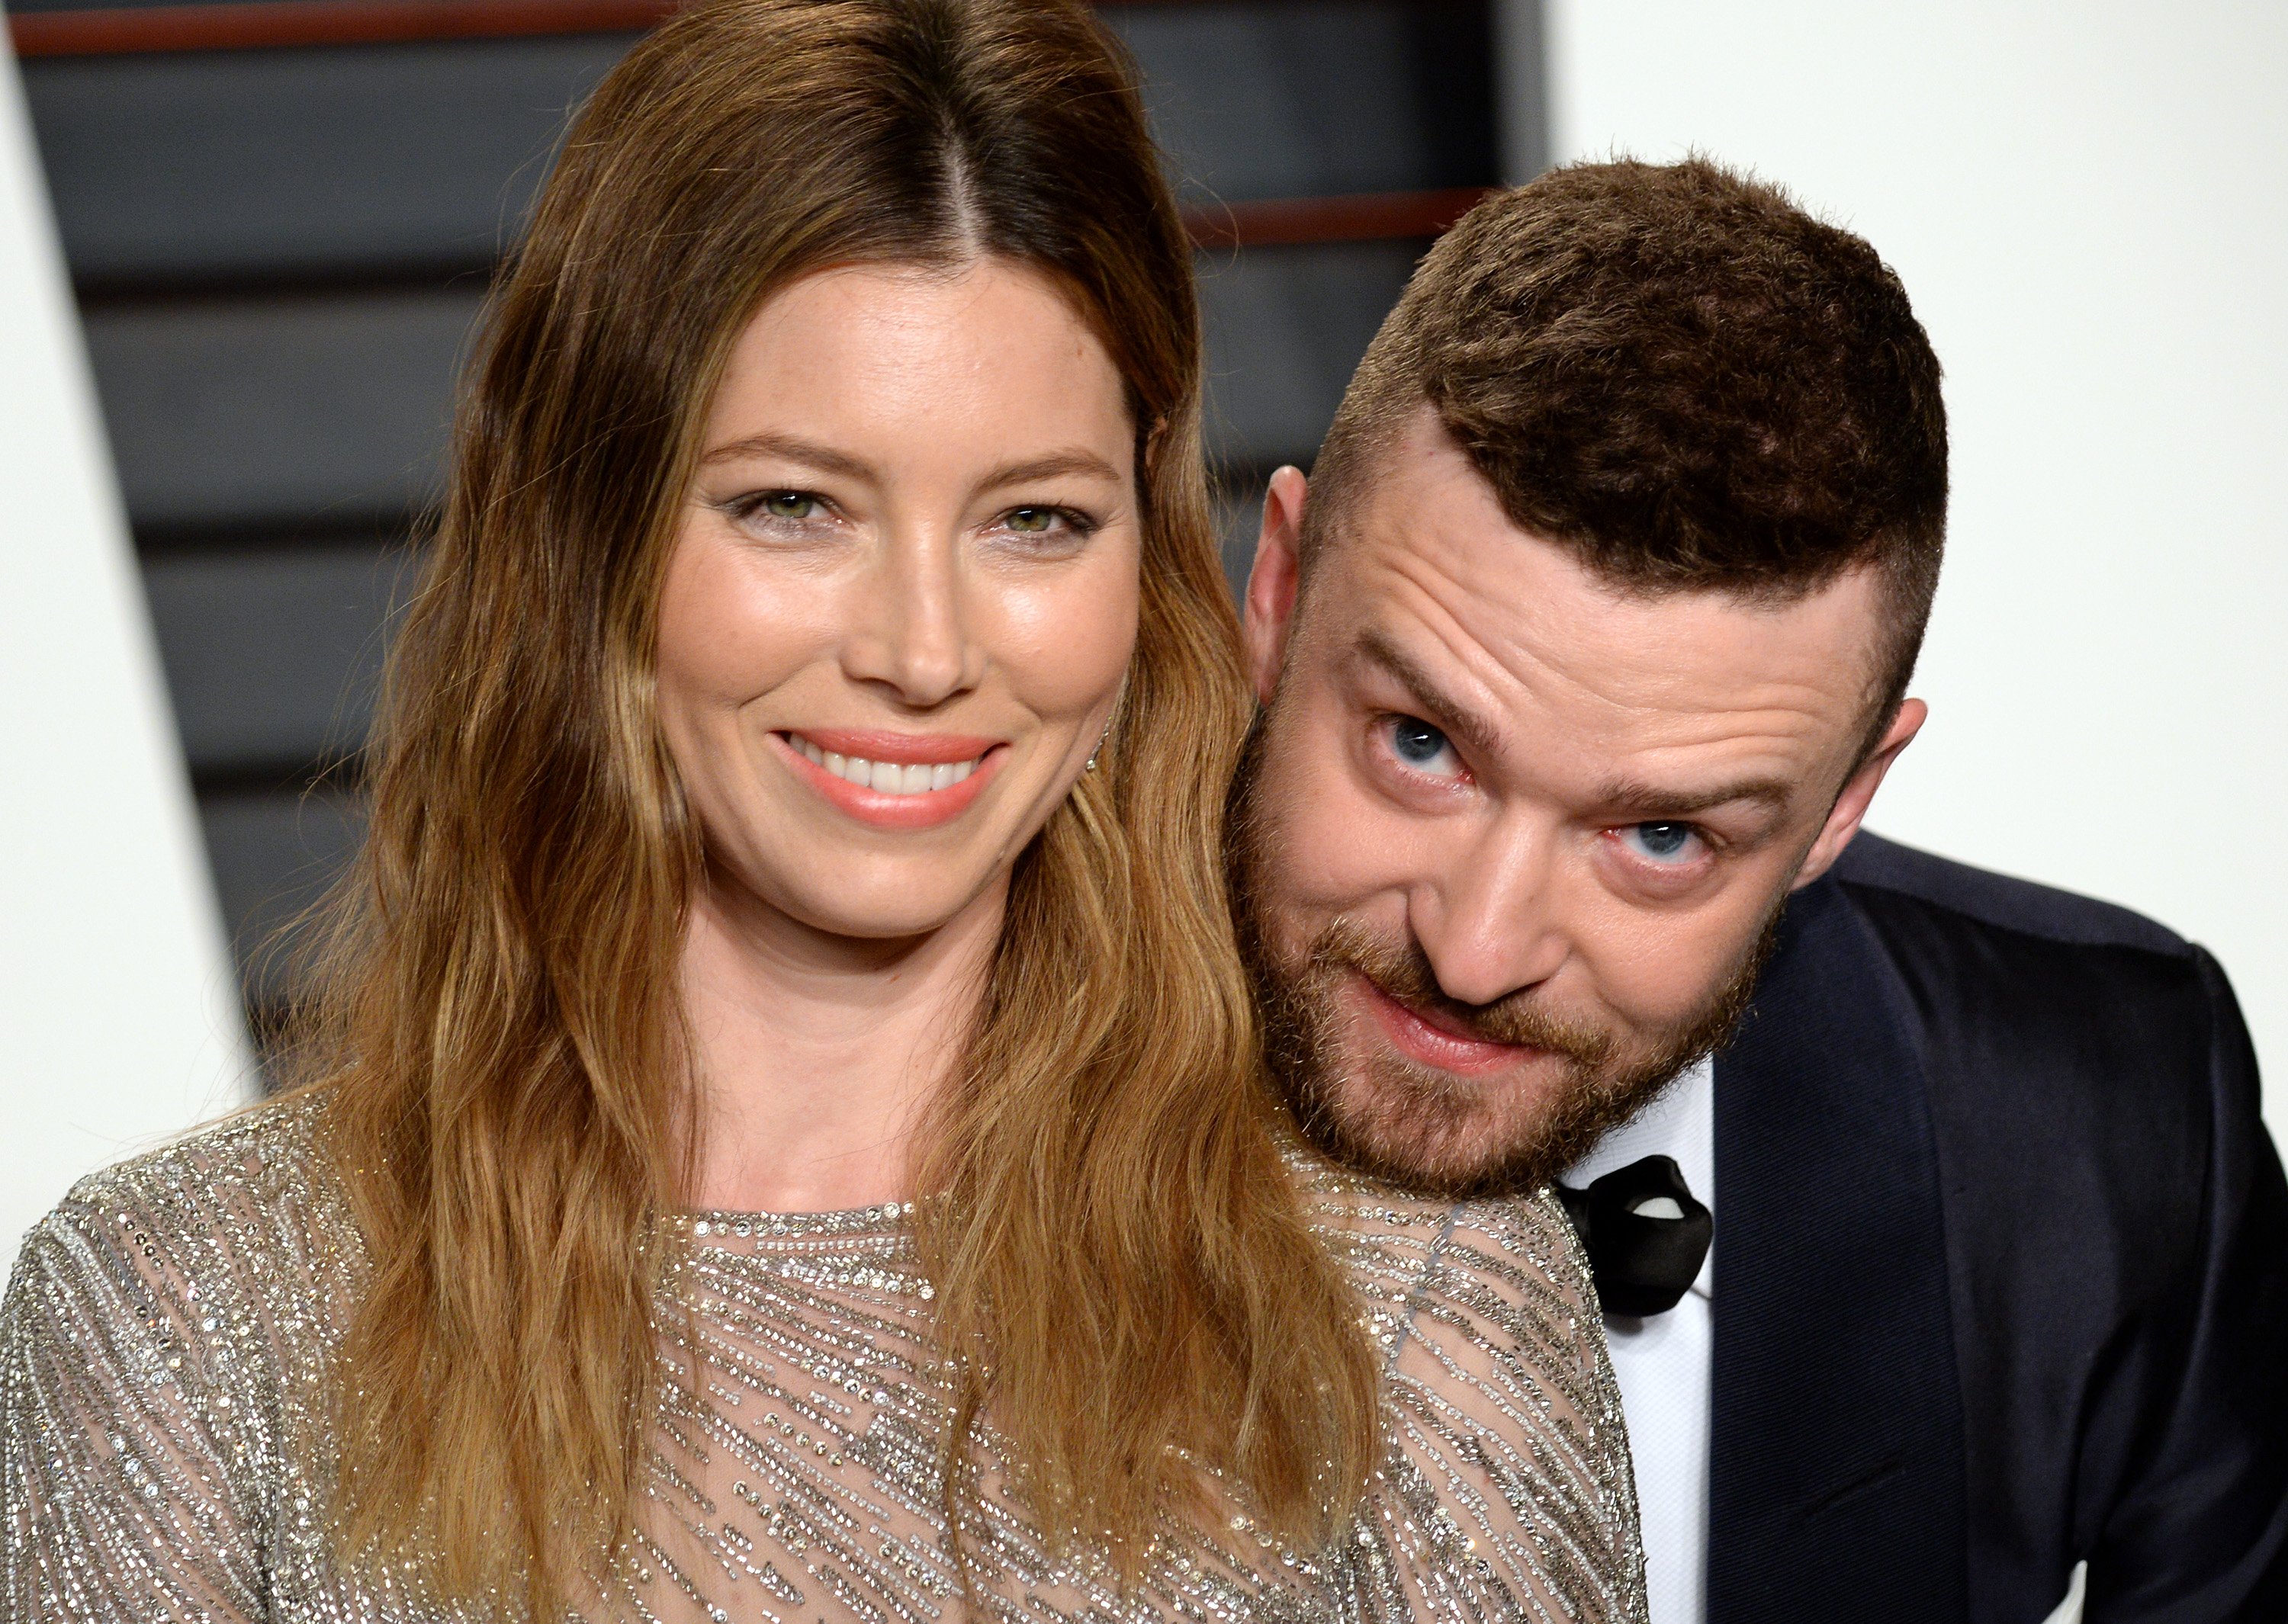 Jessica Biel and Justin Timberlake attend the 2016 Vanity Fair Oscar Party on February 28, 2016, in Beverly Hills, California. | Source: Getty Images.